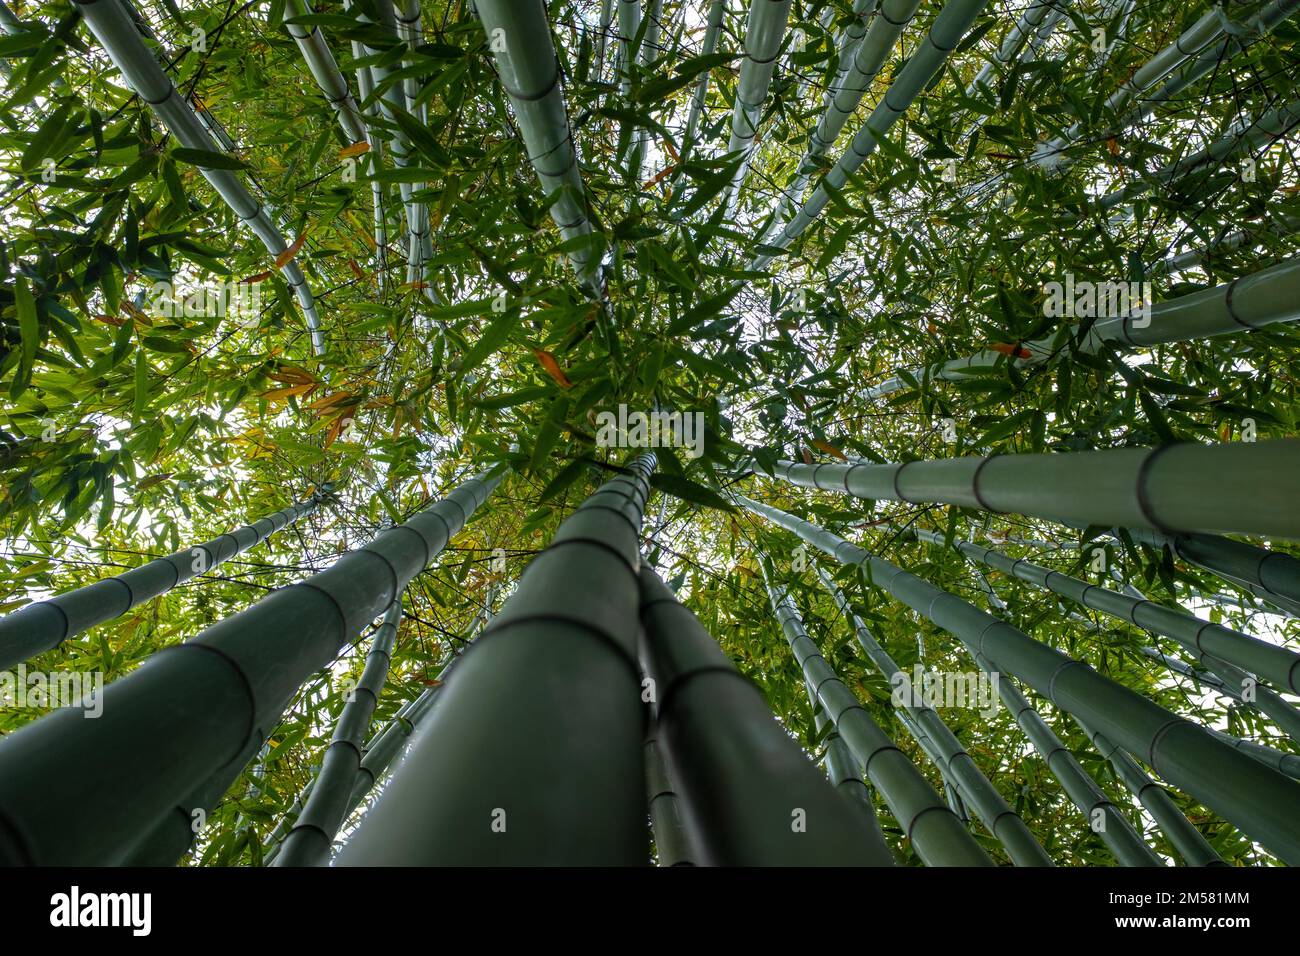 Giant green bamboos seen straight from below. Taken on a sunny spring day. Stock Photo